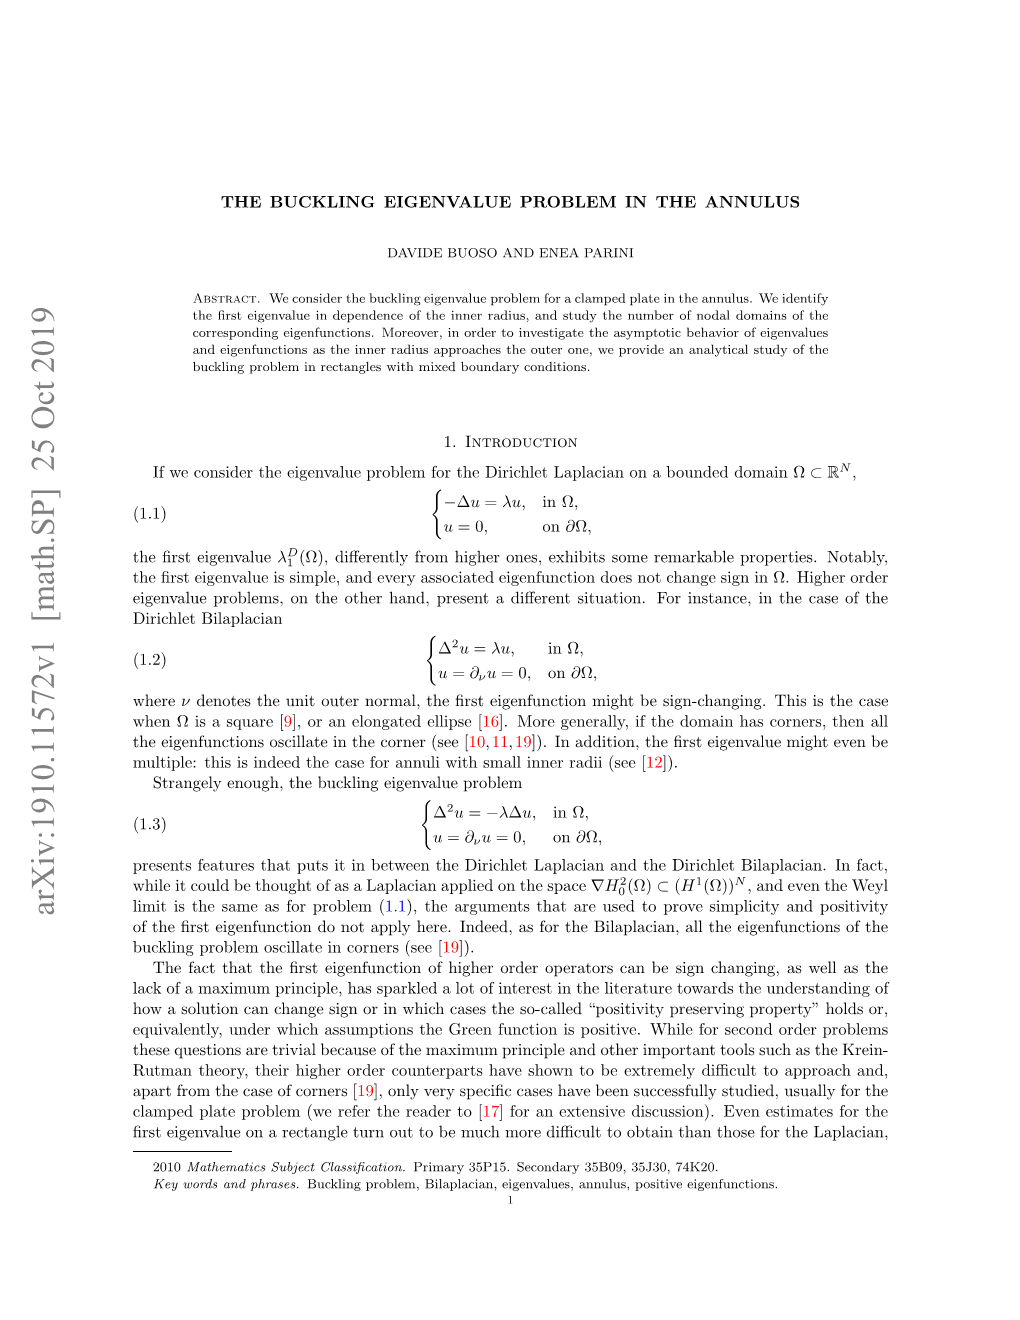 The Buckling Eigenvalue Problem in the Annulus